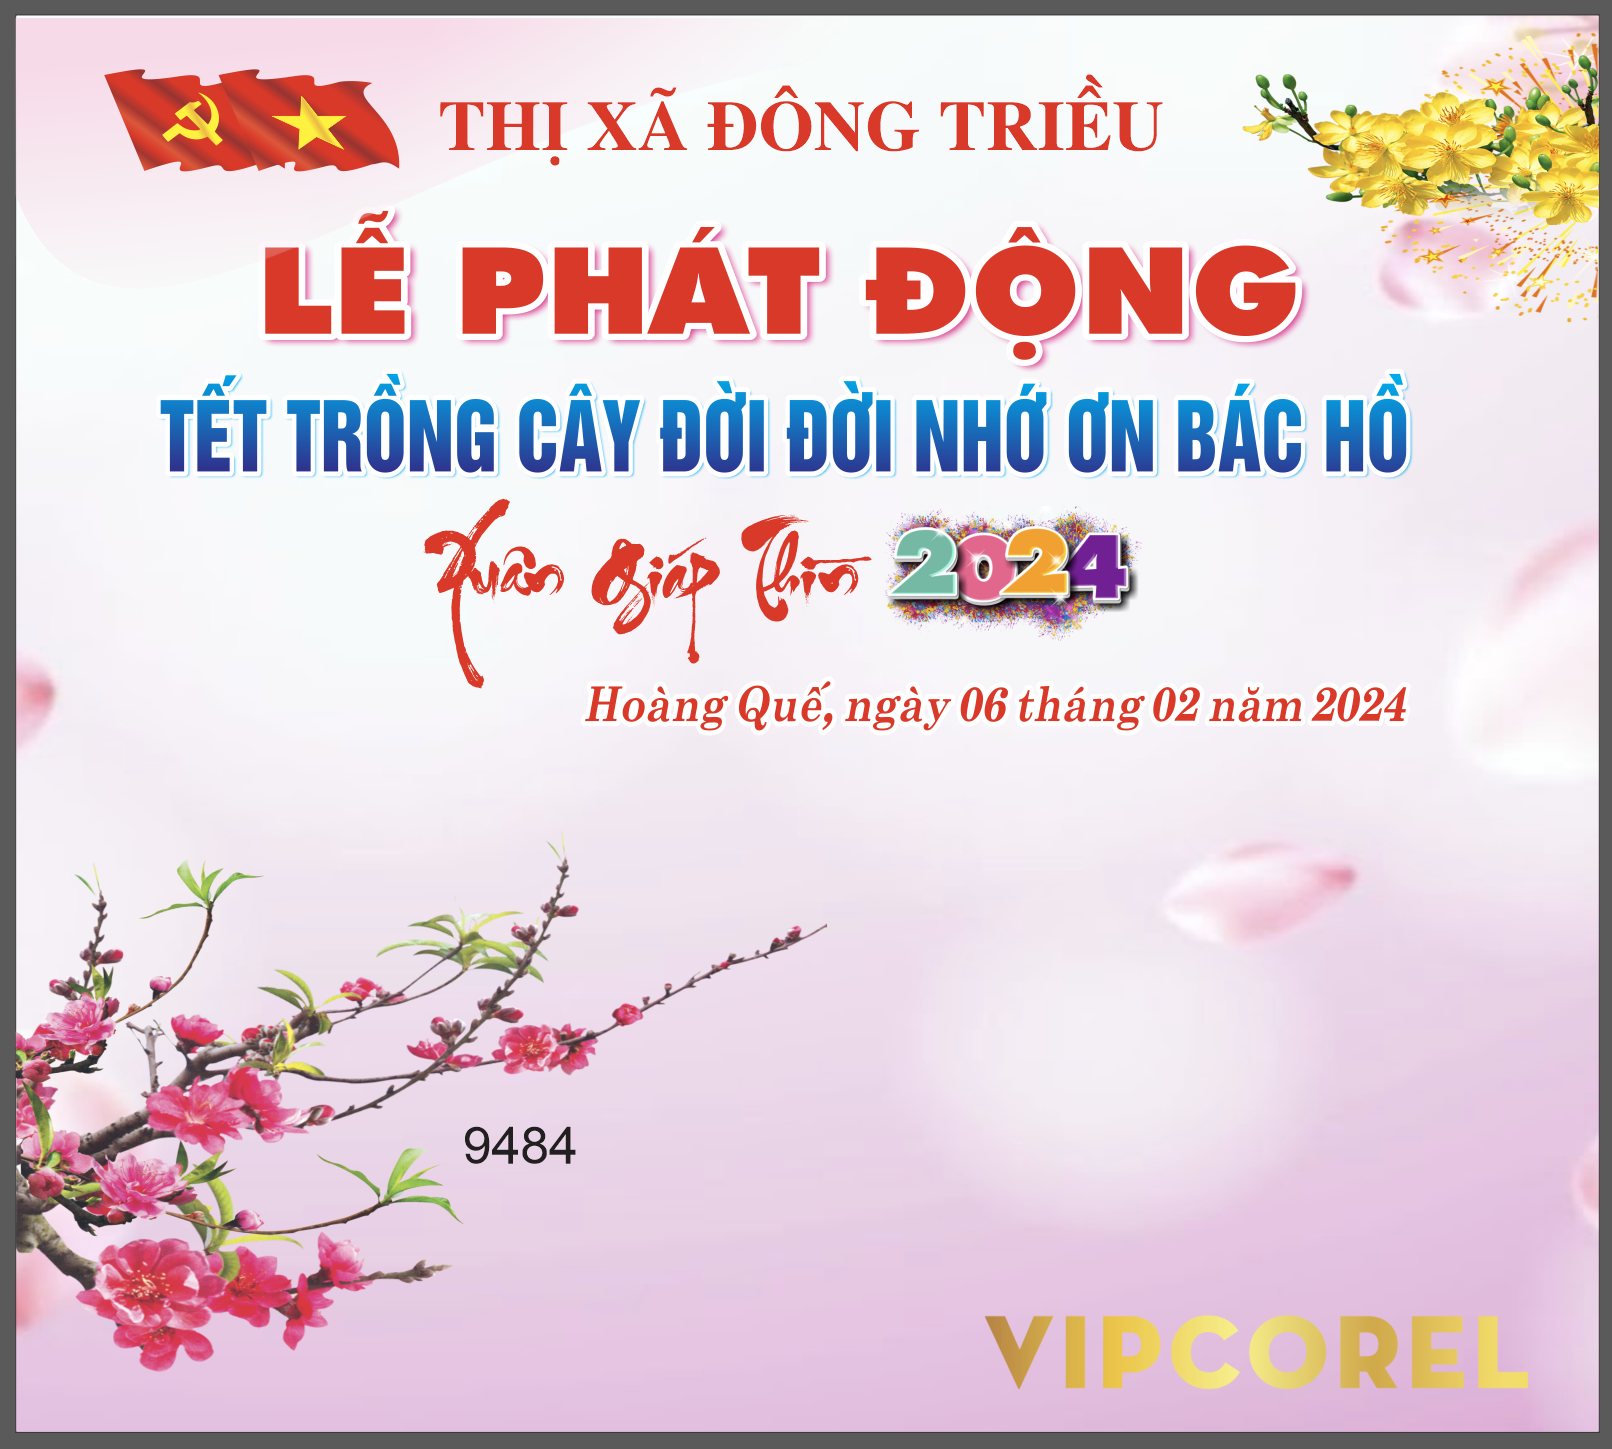 le phat dong tet trong cay 2024 #3.png